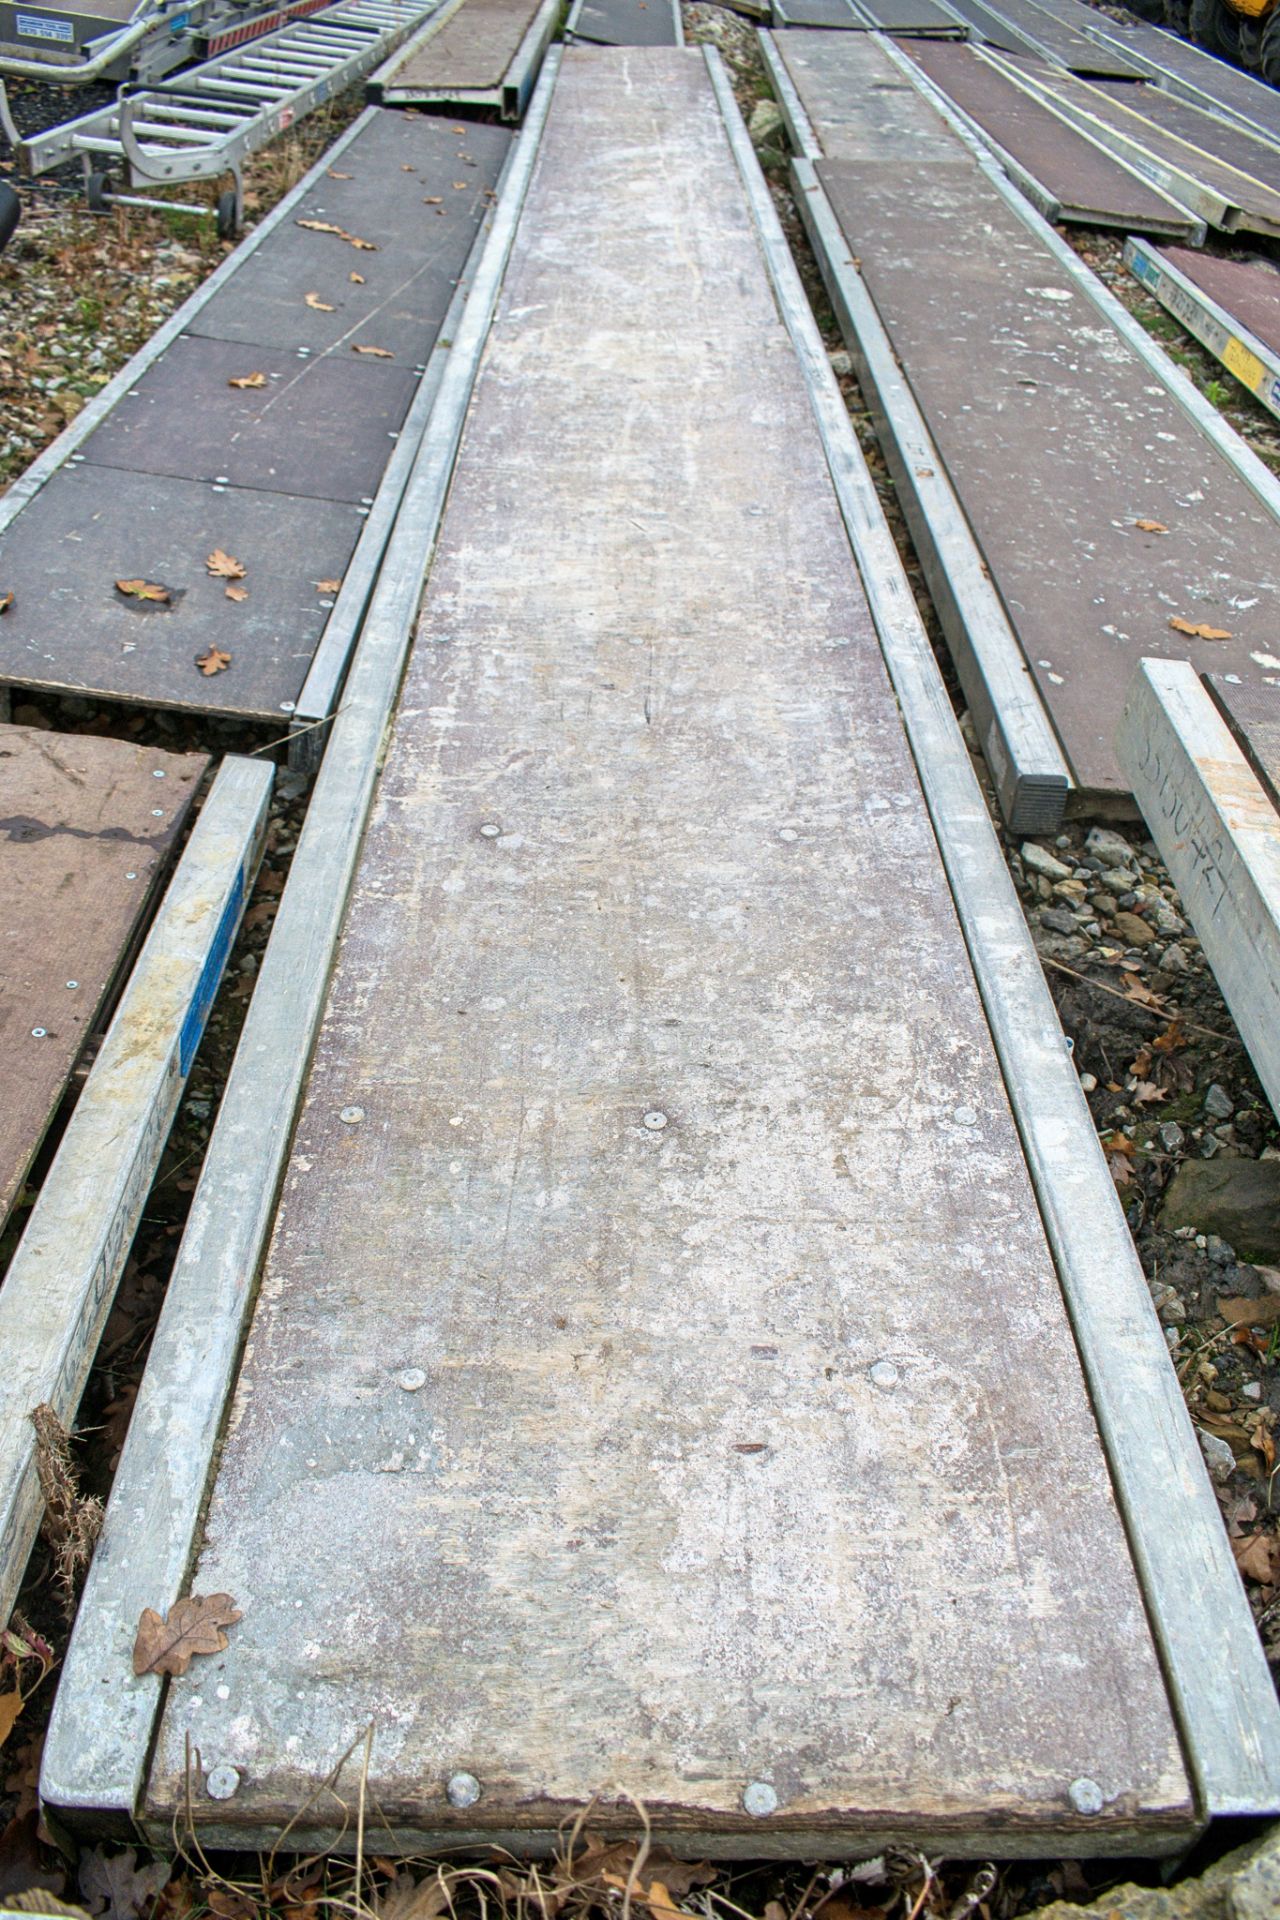 Aluminium staging board approximately 18ft long